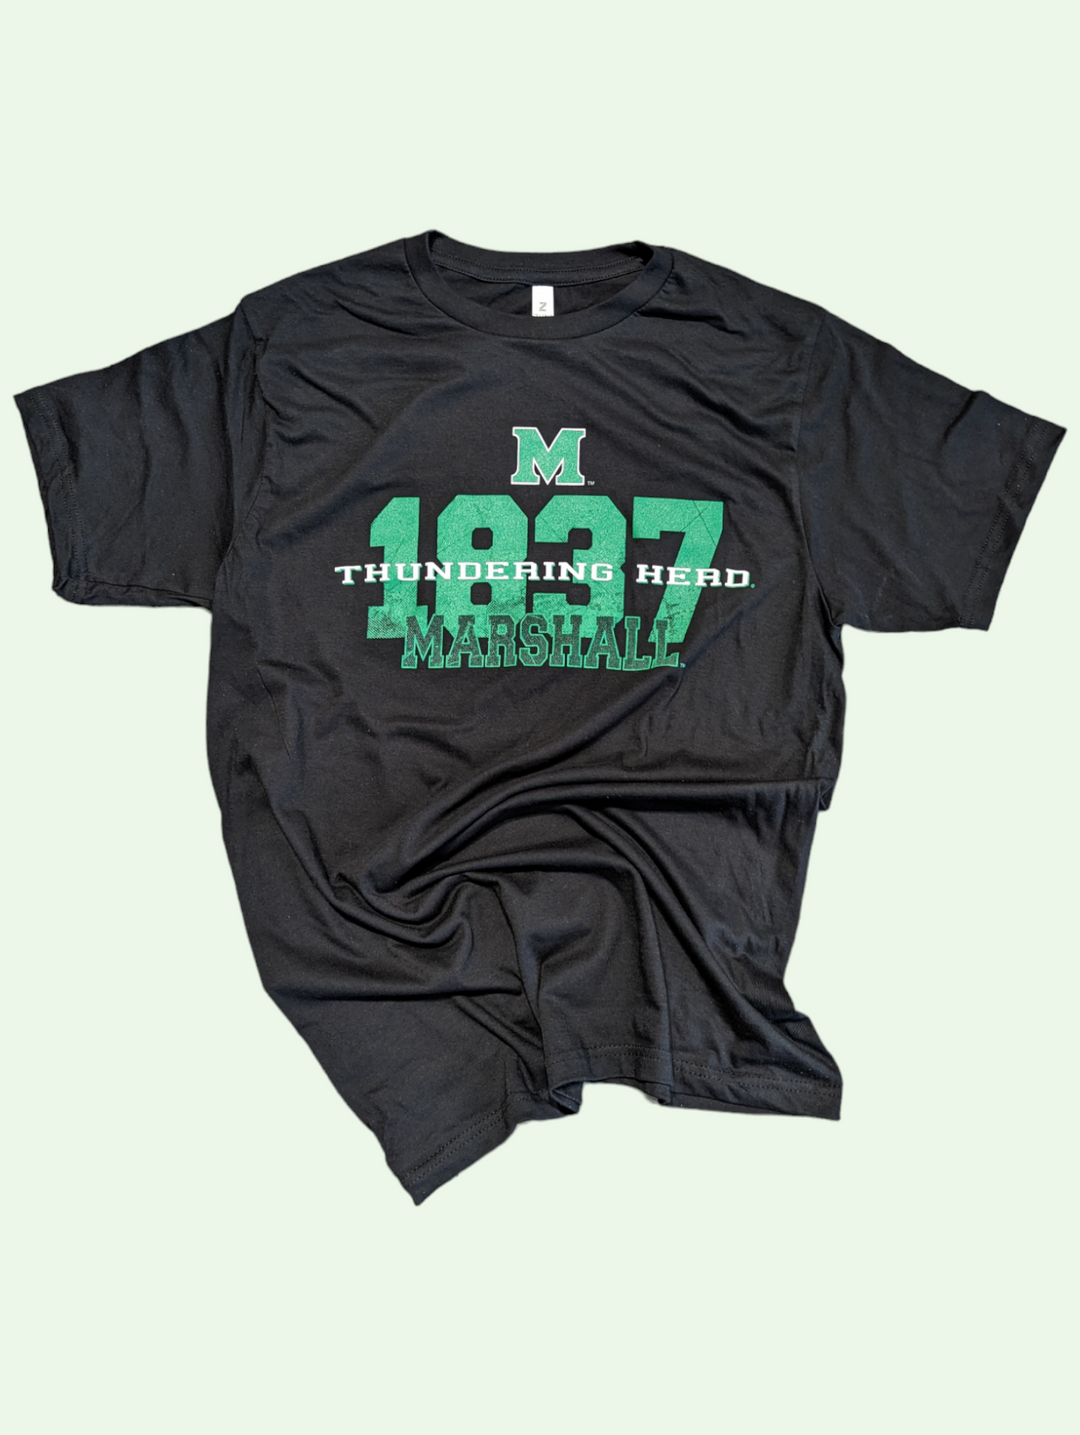 a flat lay of the 1837 tee shirt